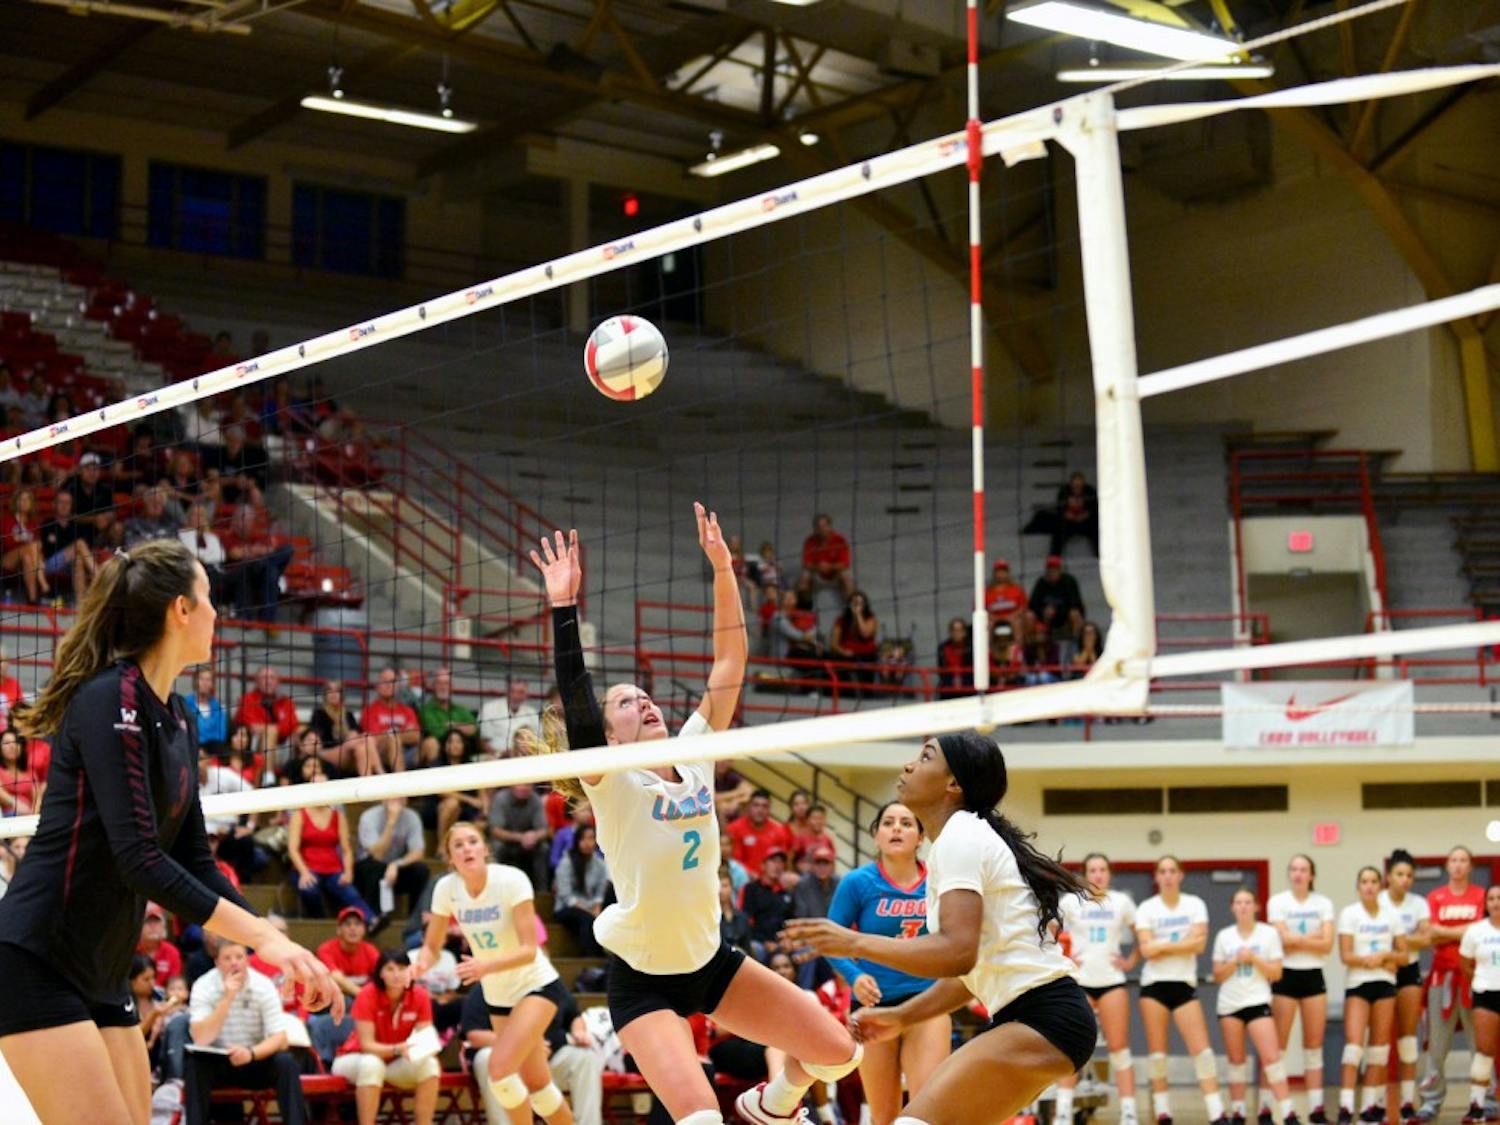 Hannah Johnson sets up Simone Henderson for a kill against Santa Clara Friday night. The first of three games in the Lobo Classic was in the Lobos favor, beating the Broncos 3-0 for head coach Jeff Nelson’s 400th win.